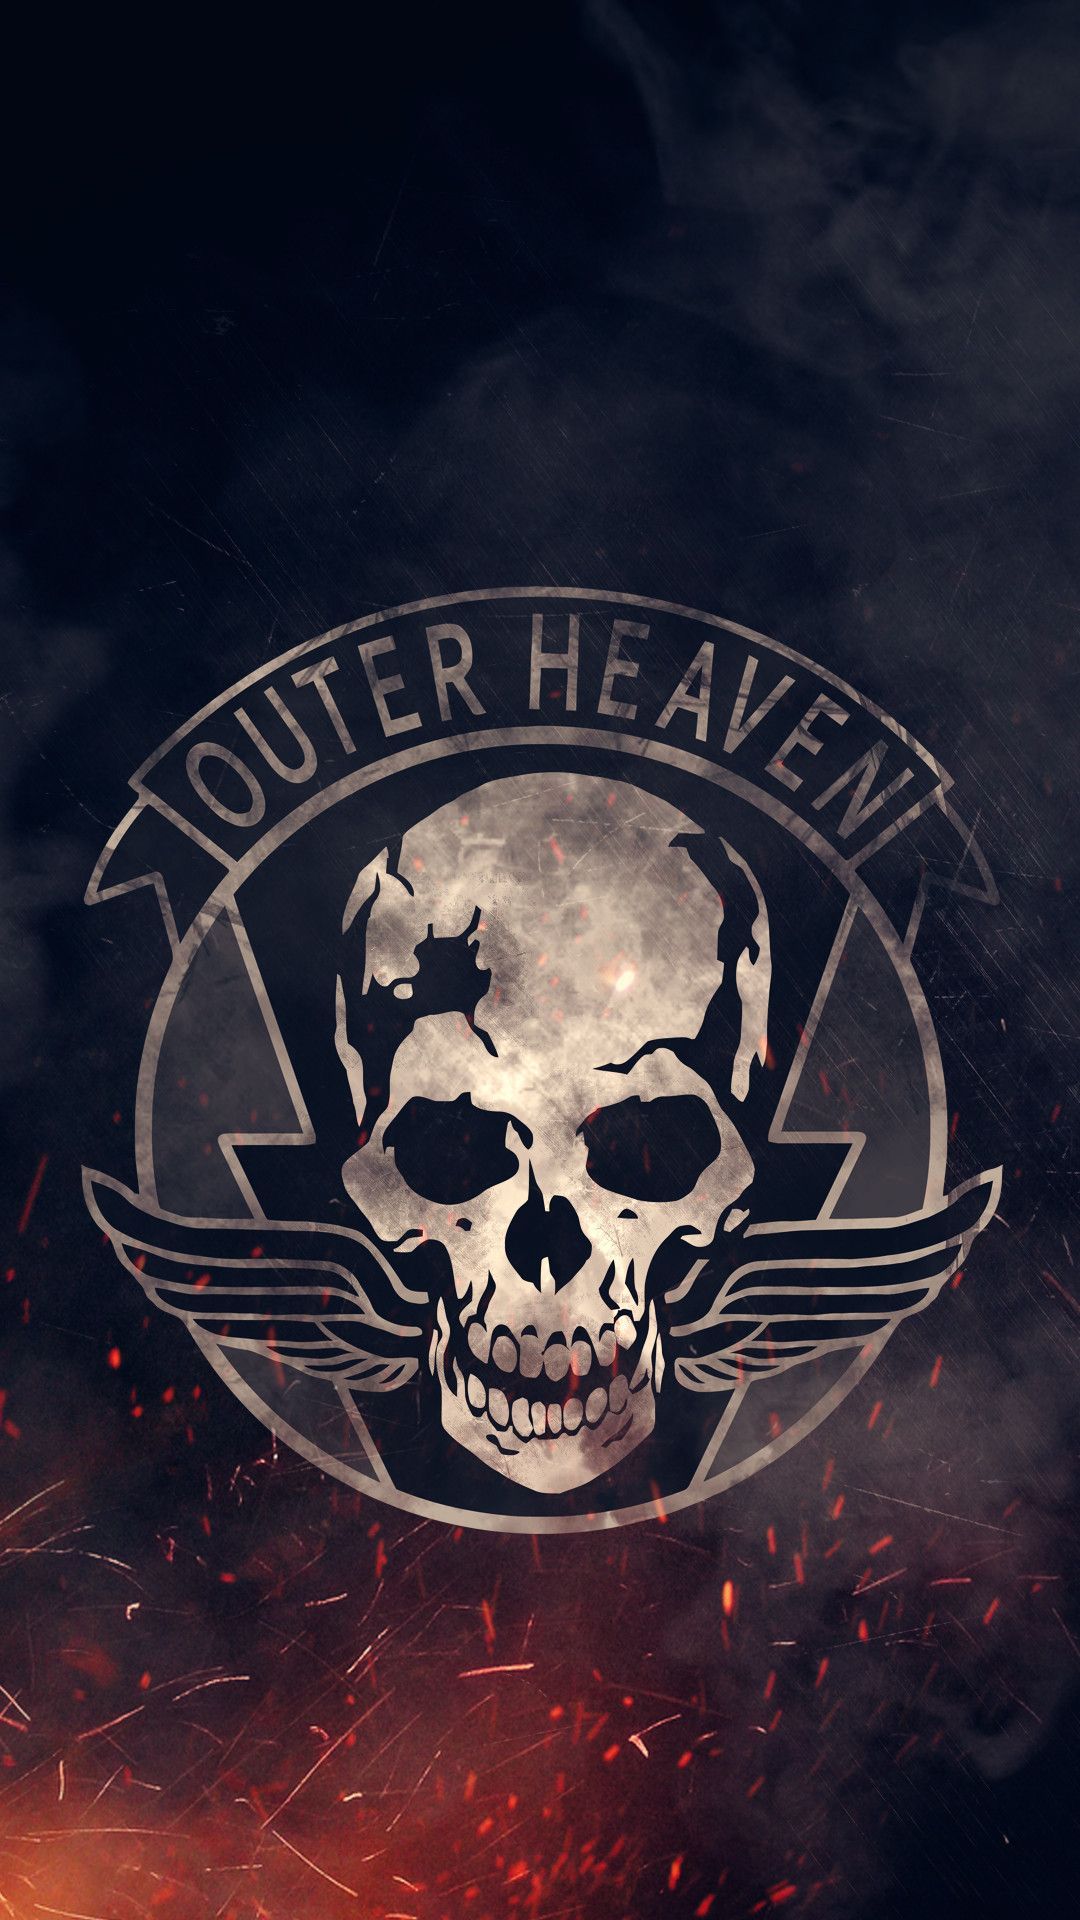 Outer Heaven メタルギア Iphone Wallpapers